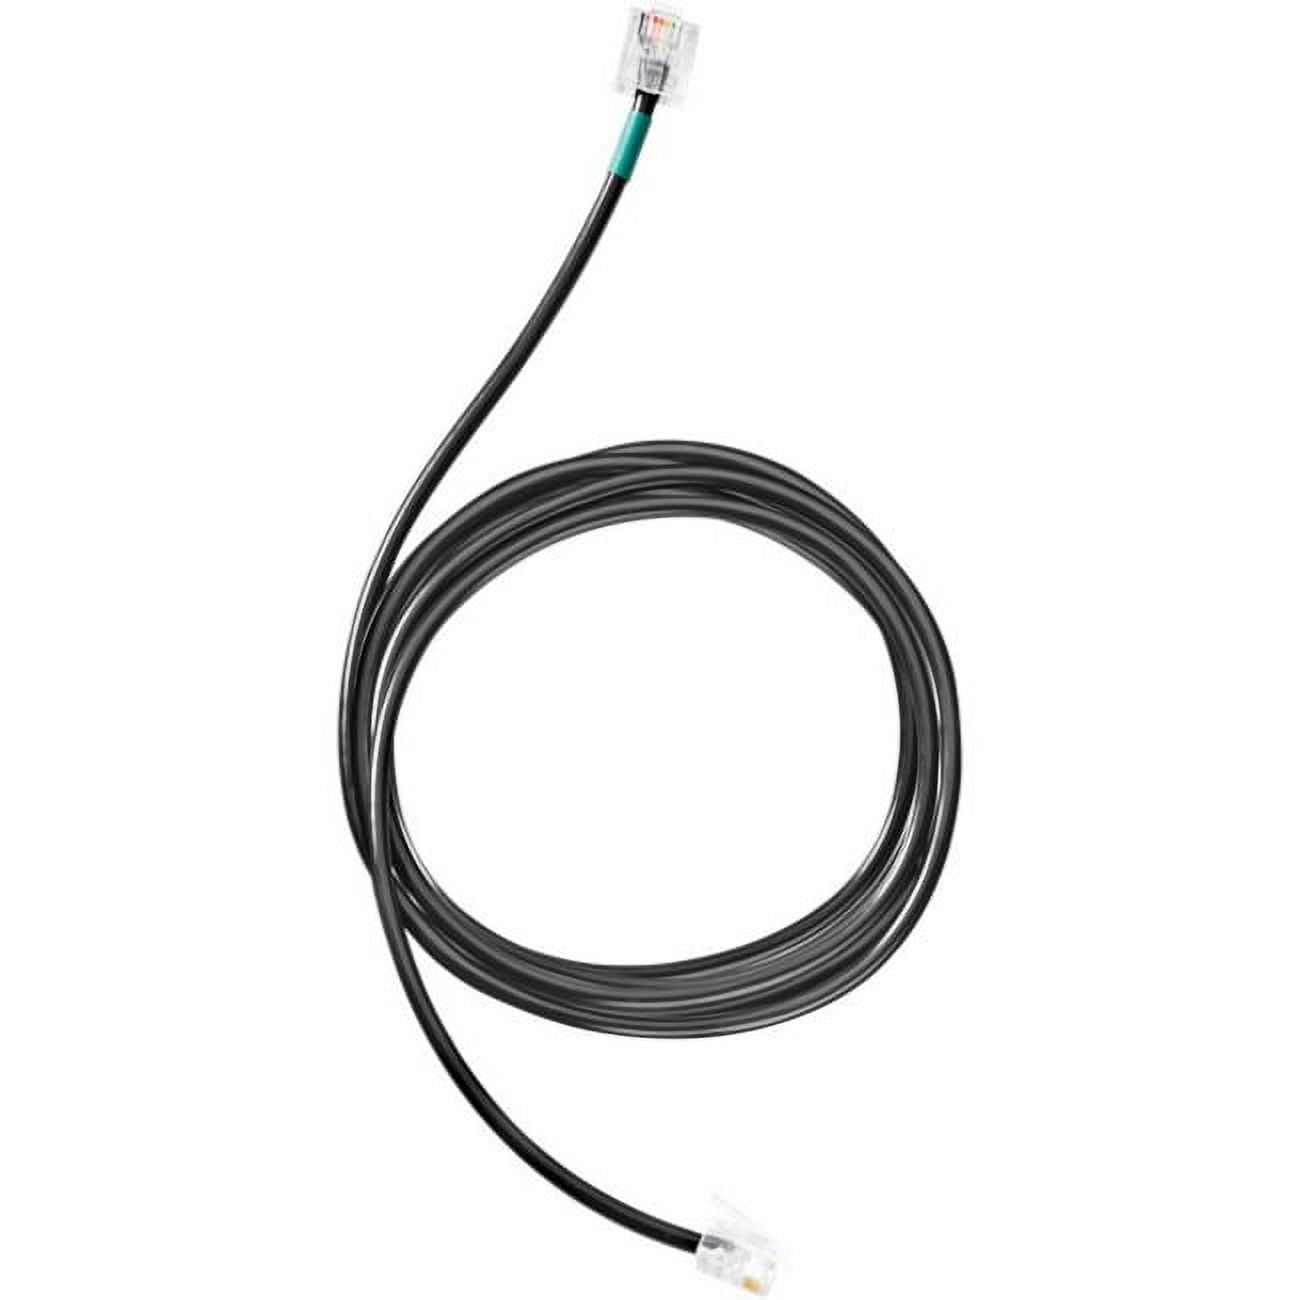 EPOS DHSG Cable for Elec. Hook Switch CEHS-DHSG - image 2 of 2